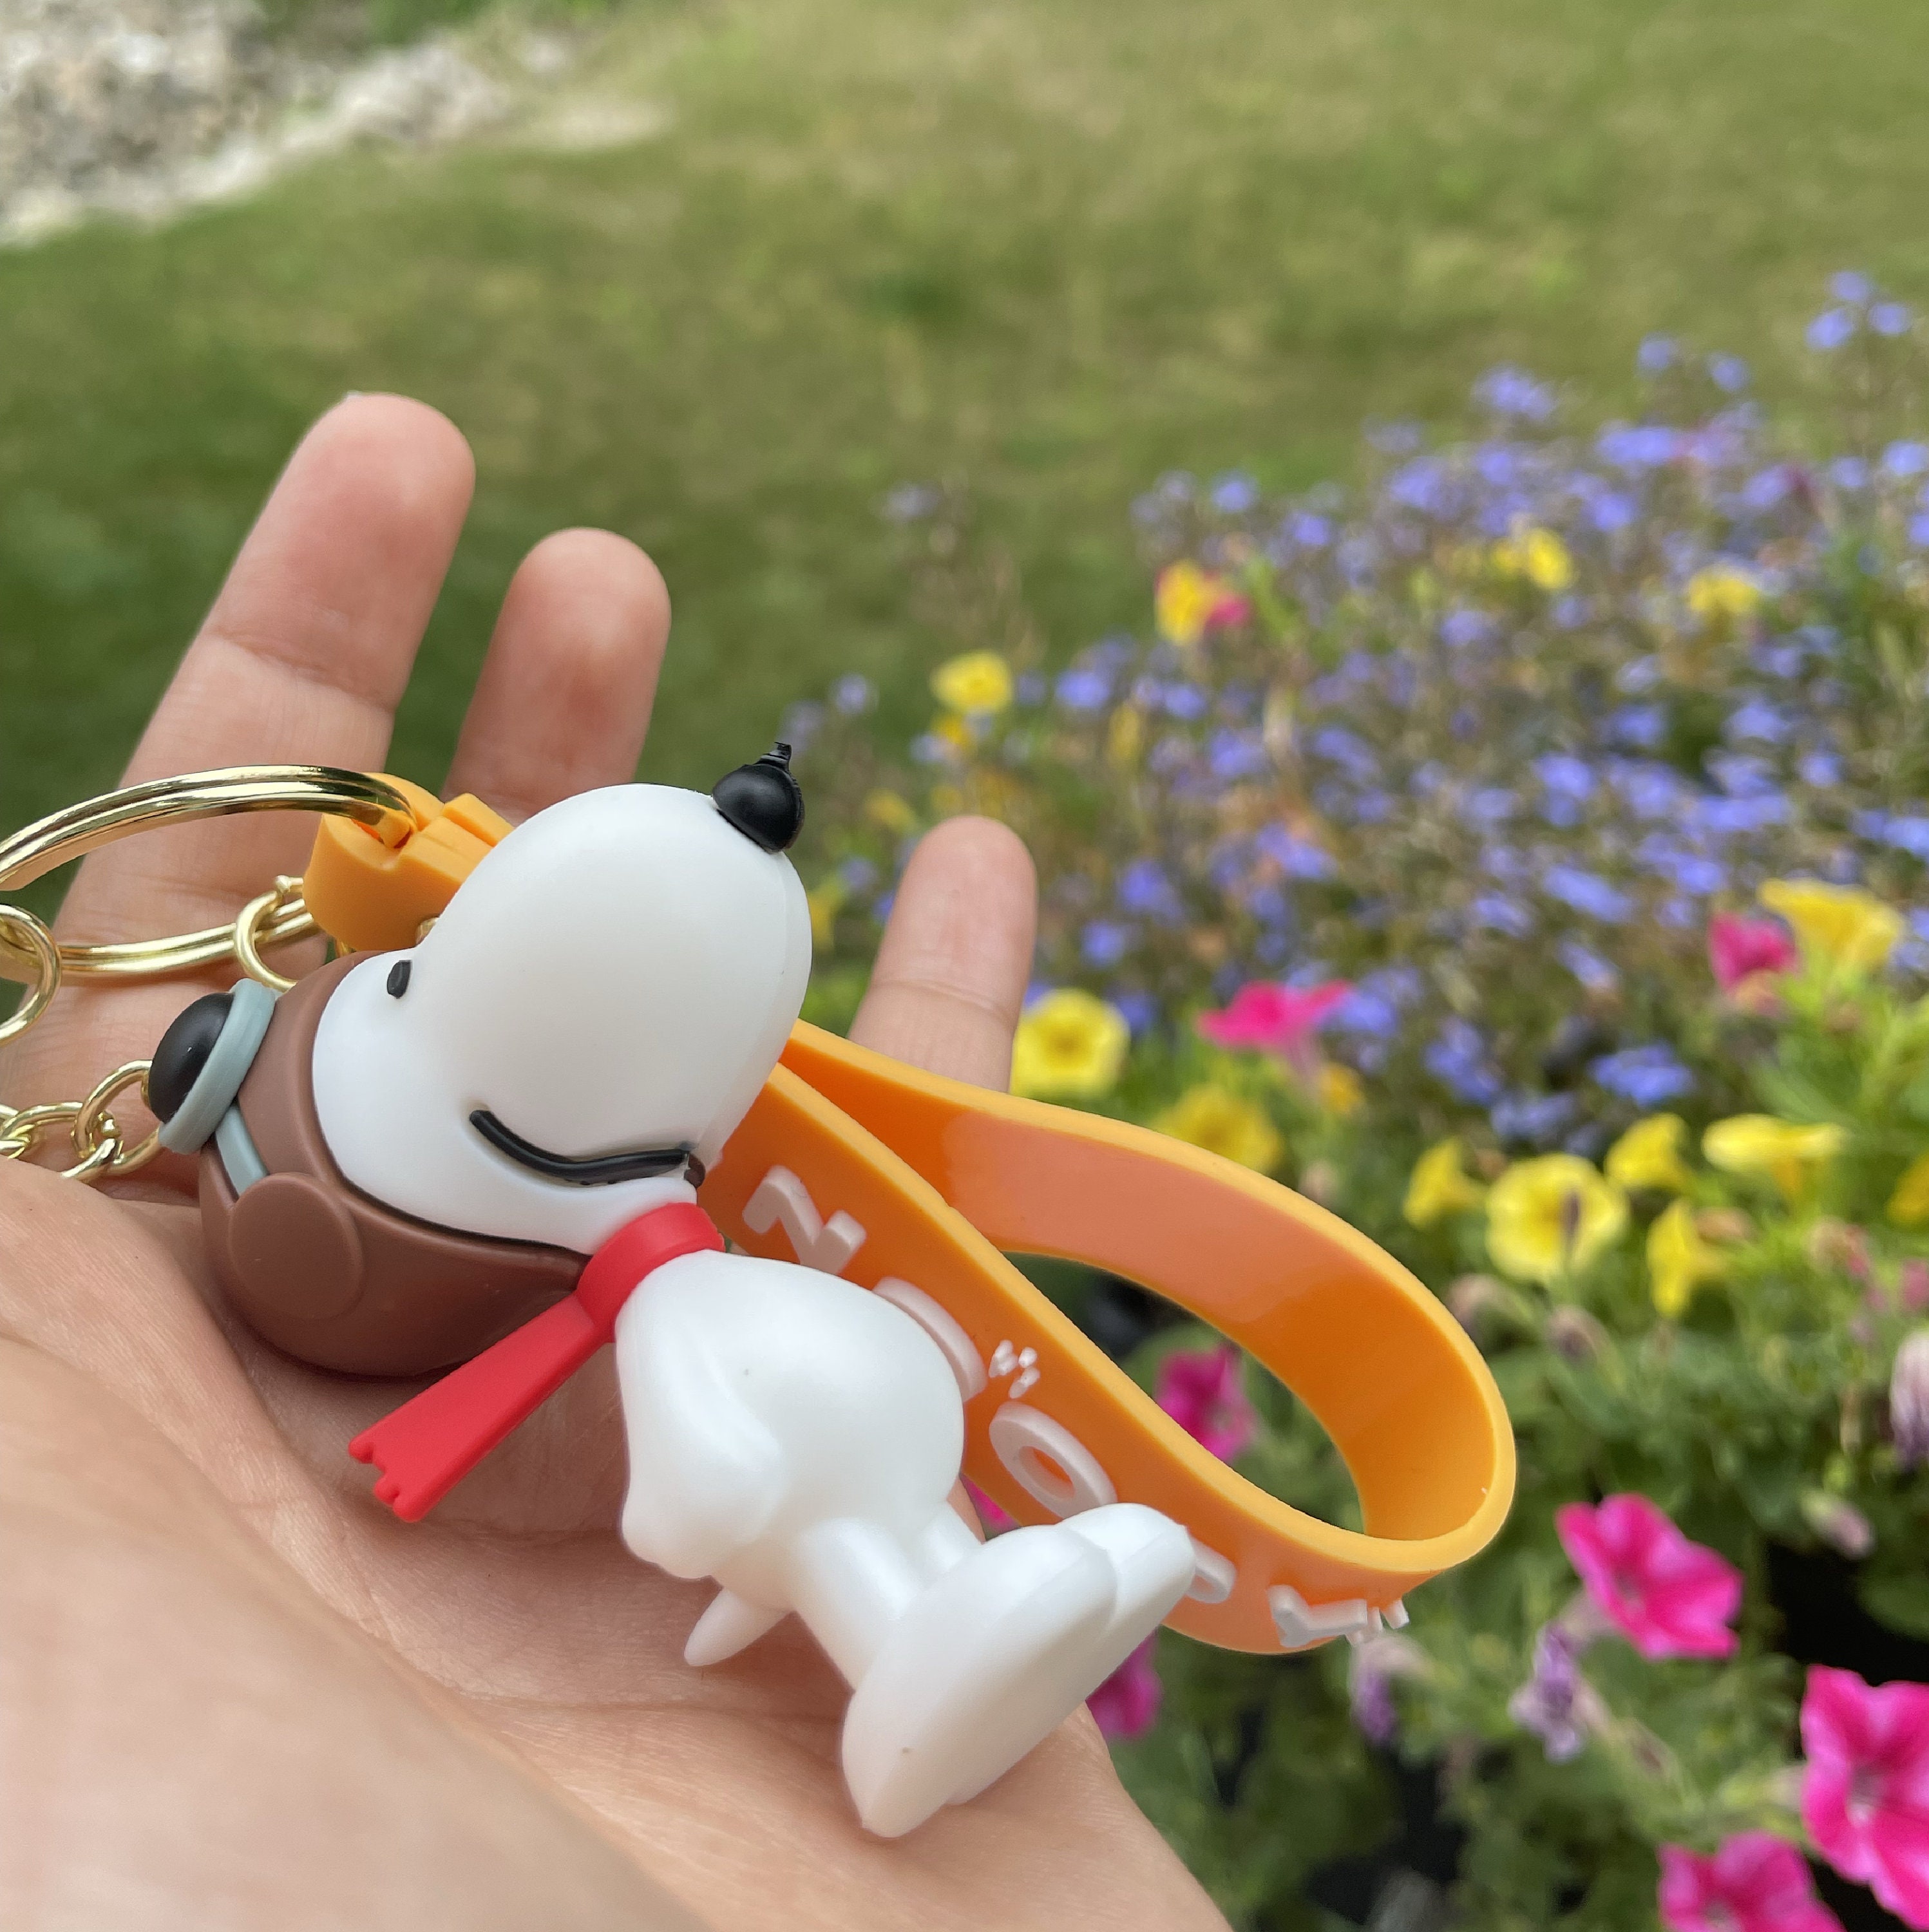  SNOOPY LOVES WOODSTOCK PEANUTS CHARACTER JEWELRY CHARM FOR  YOUR PETS COLLAR, PURSE, LEASH, JOB LANYARD, DIY PROJECT, ETC. : Pet  Supplies